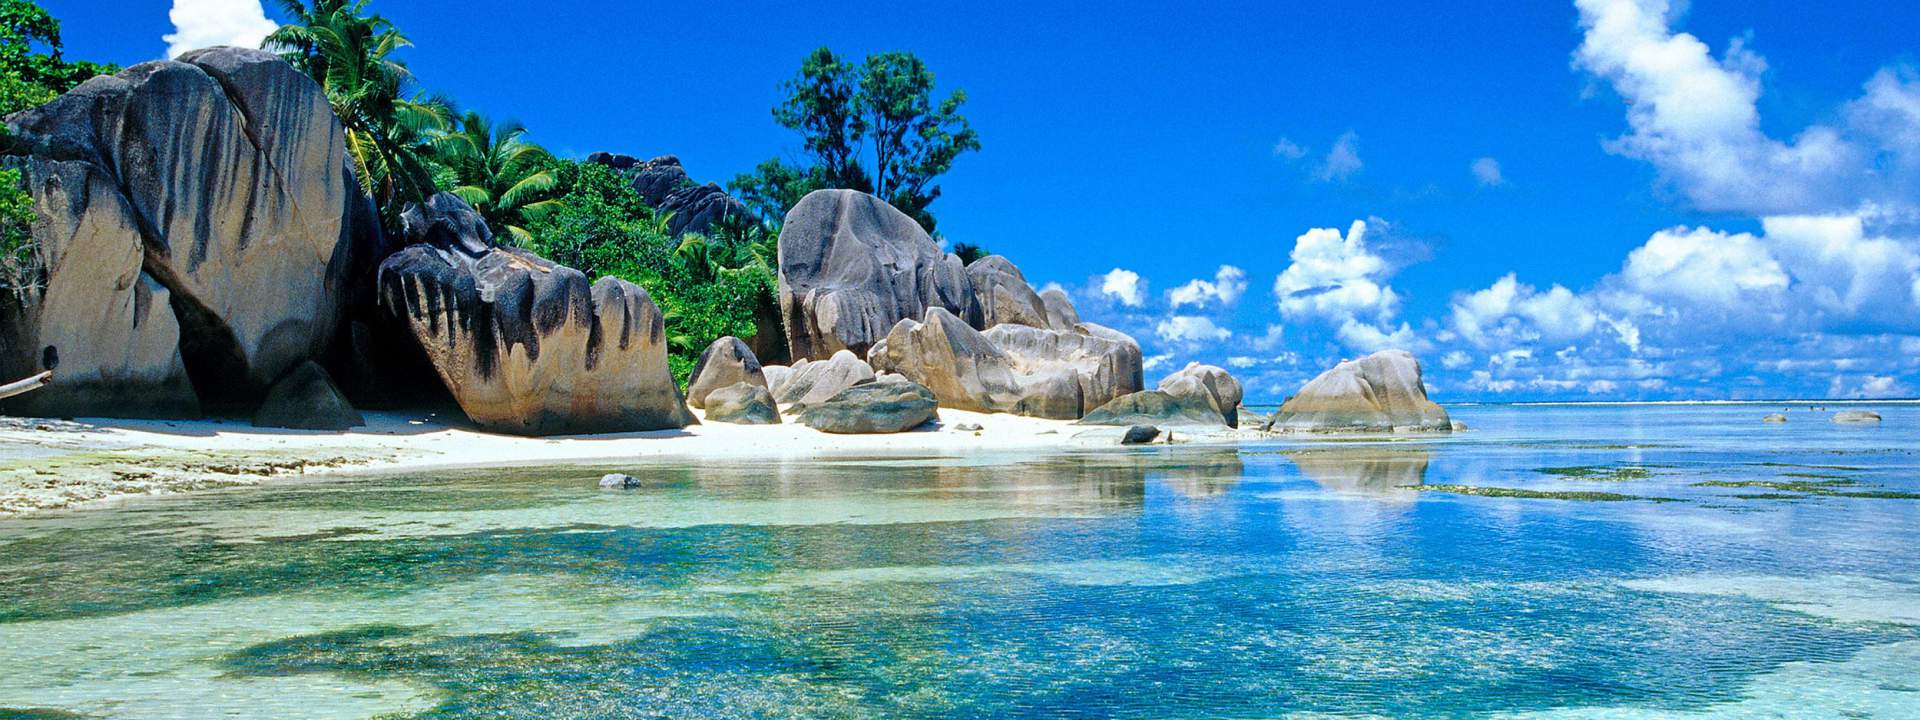 Discover the Seychelles on a cabin cruise